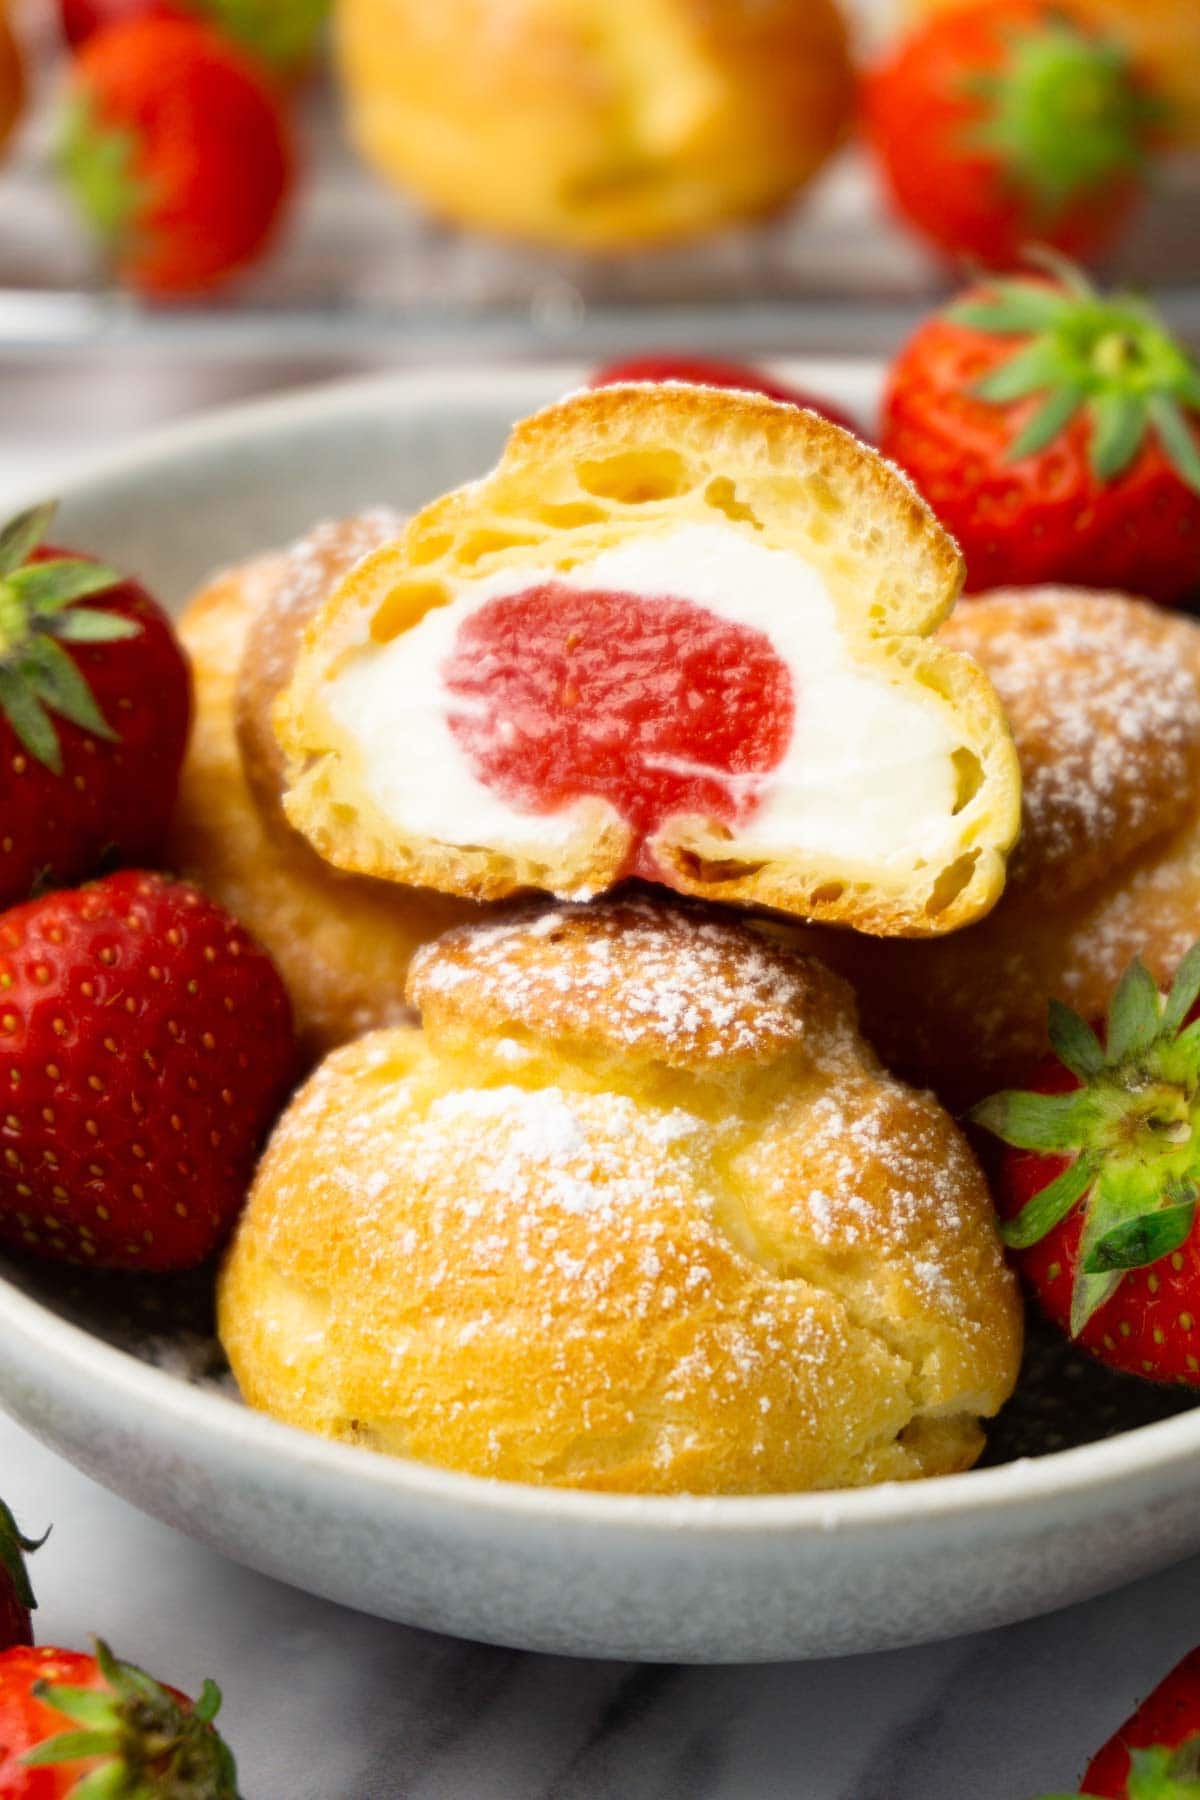 Cut in half cream puff filled with cream cheese filling and strawberry sauce in a bowl with more cream puffs and fresh strawberries.